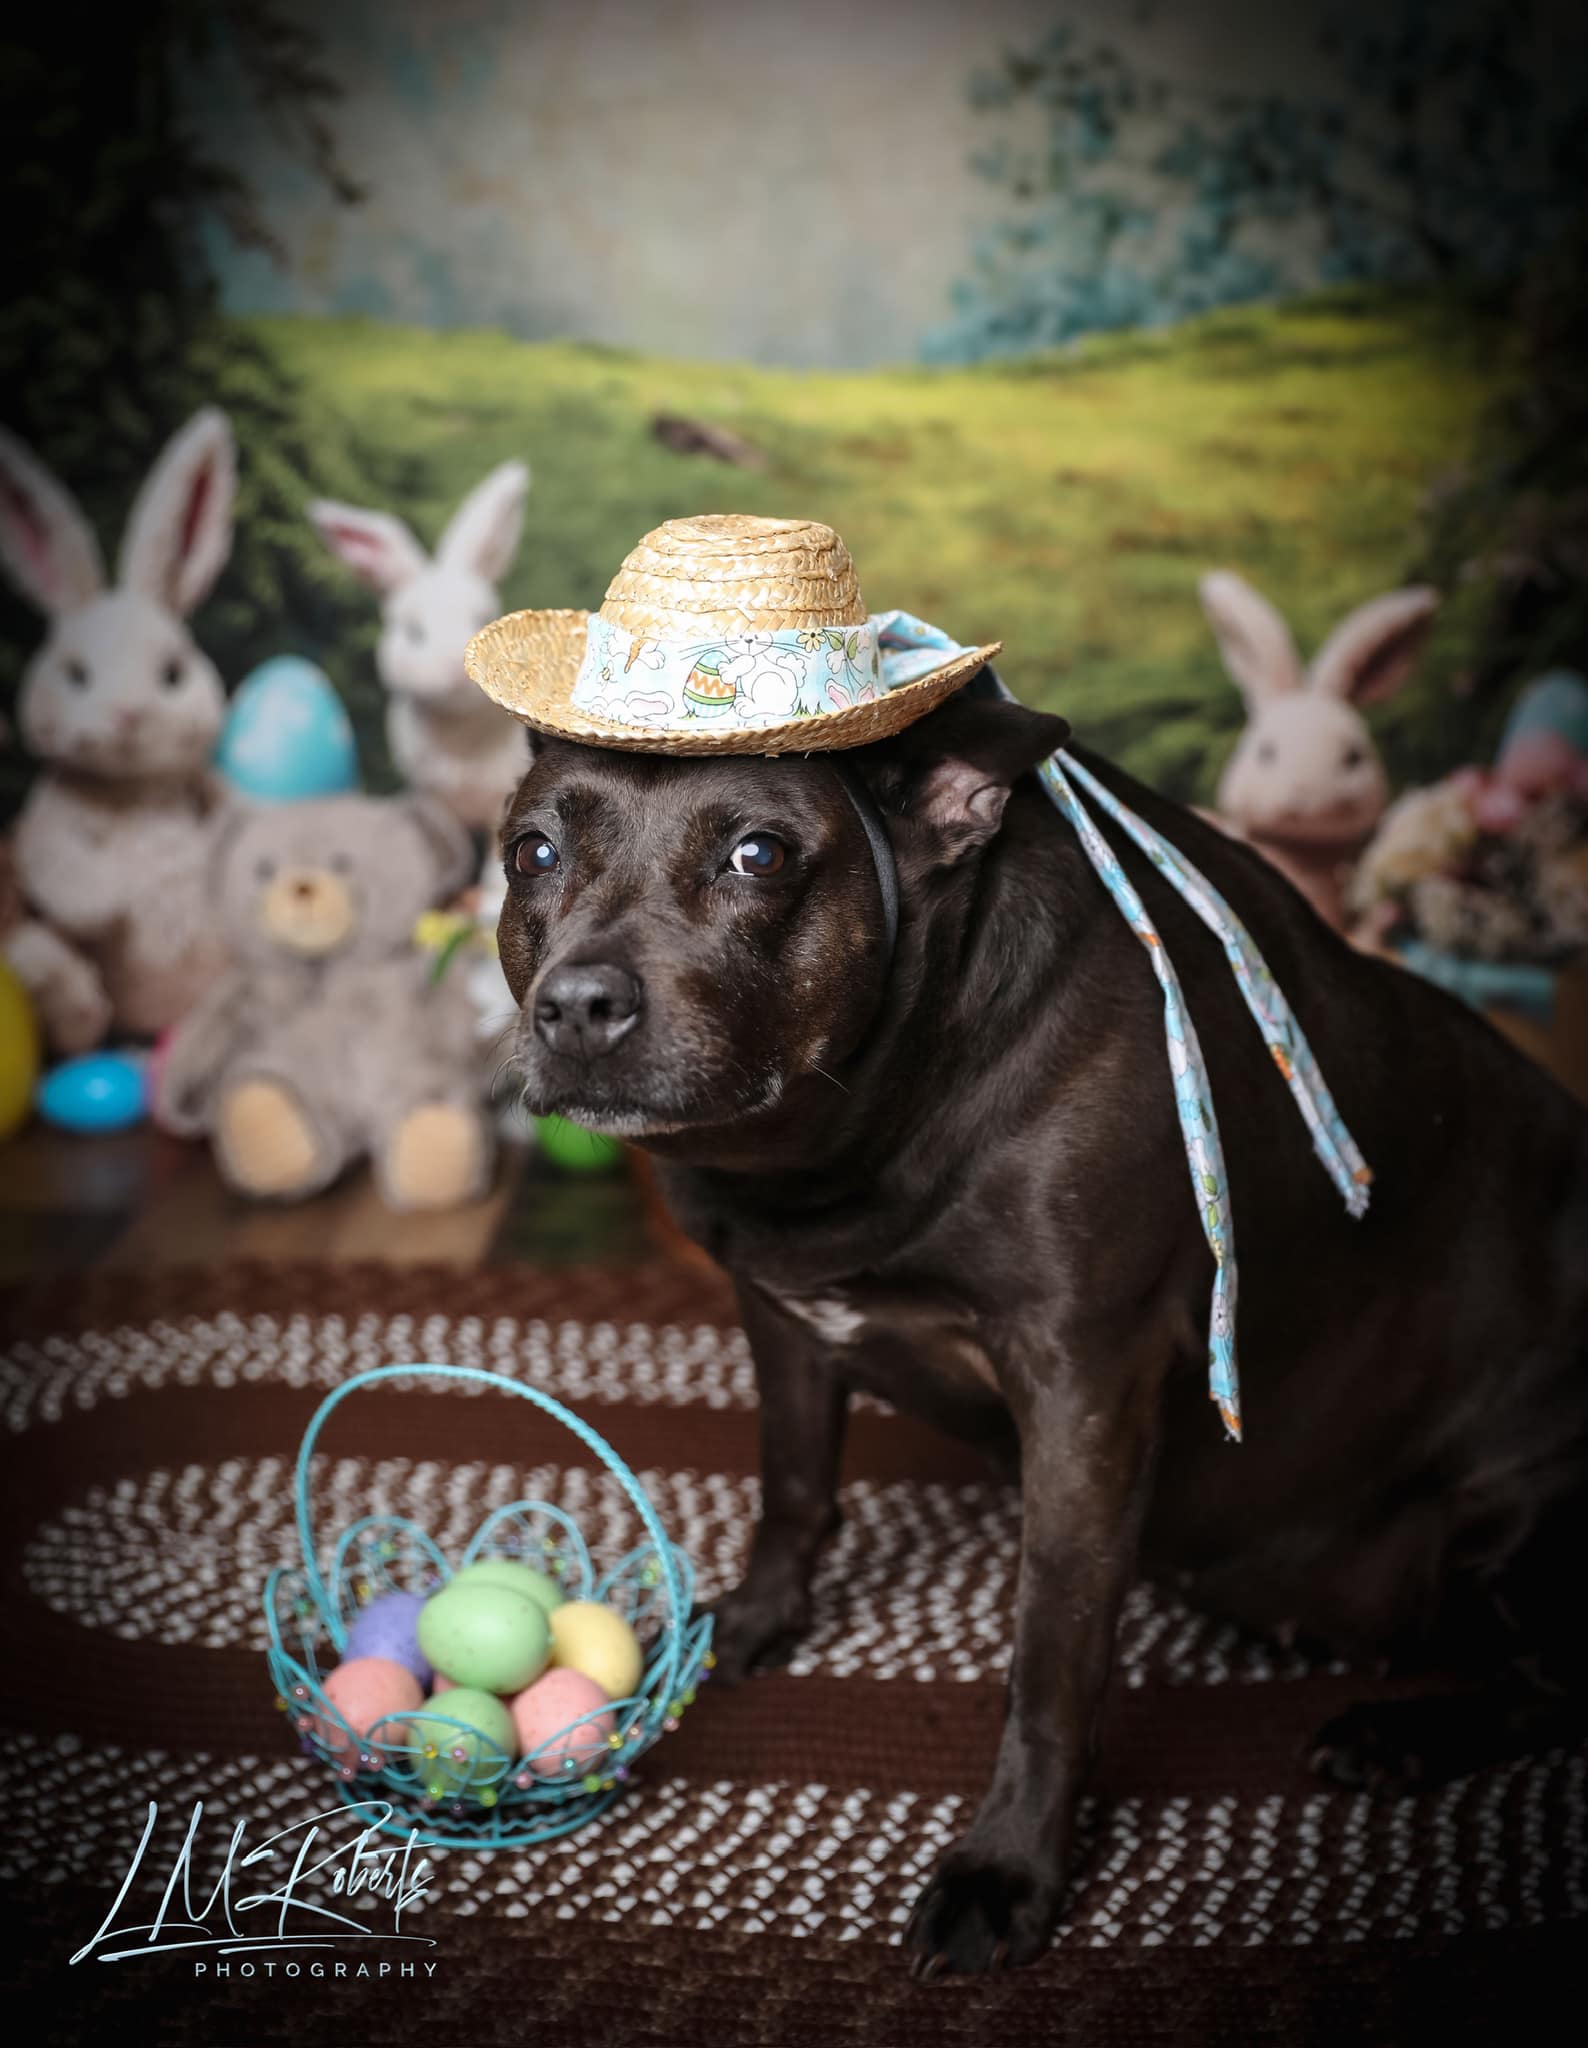 Kate Pet Easter Bunny Window View Backdrop for Photography